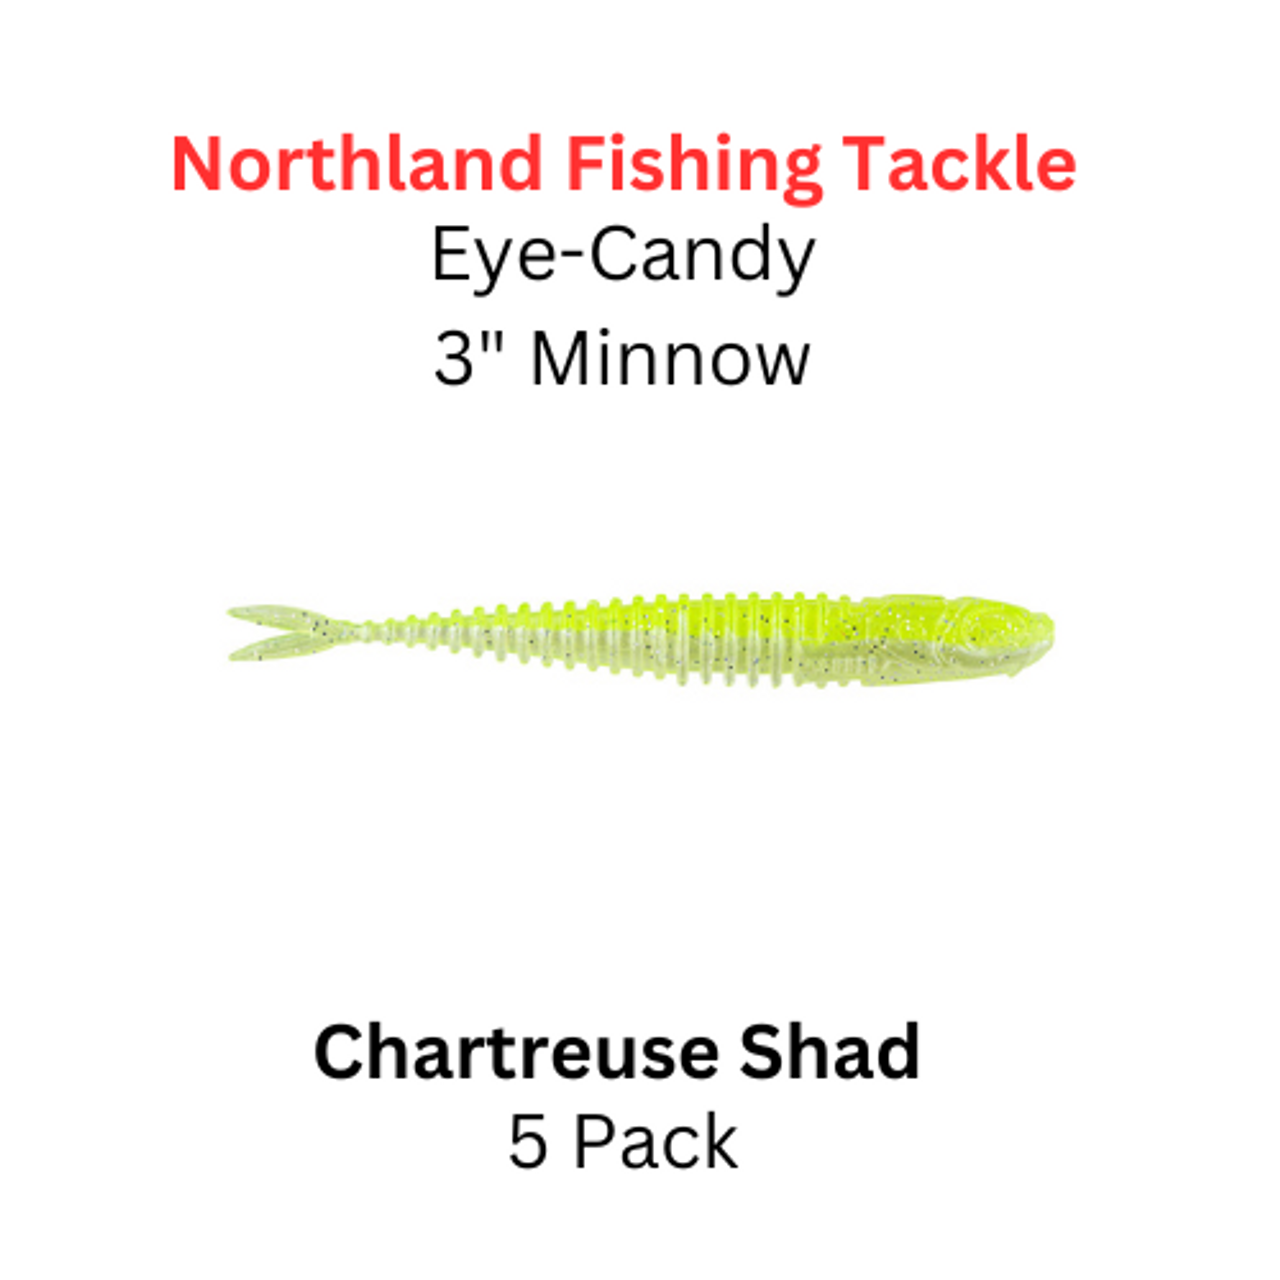 https://cdn11.bigcommerce.com/s-u9nbd/images/stencil/1280x1280/products/6688/16912/Northland_Fishing_Tackle_Eye_Candy_3_minnow_Chartreuse_Shad__83923.1688770507.png?c=2